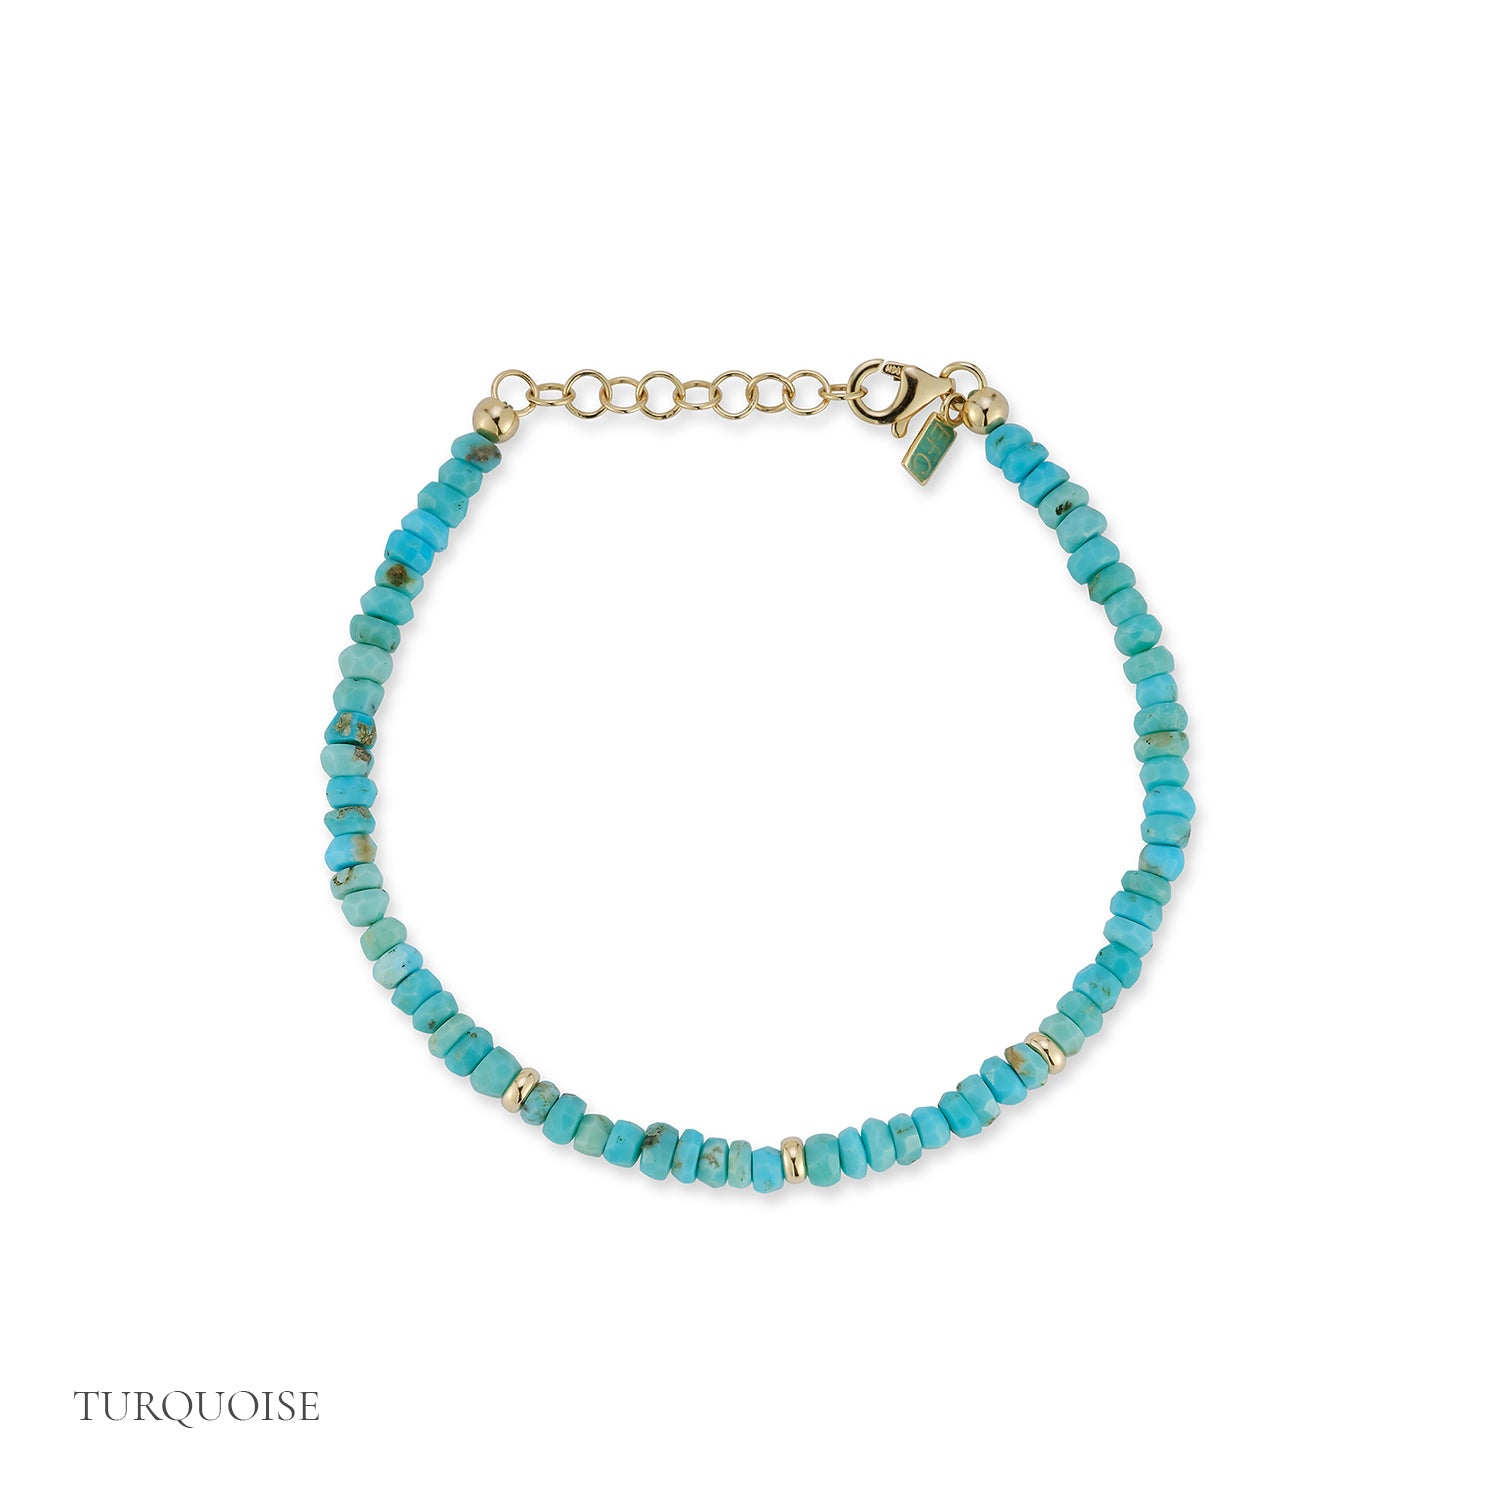 Child’s Elasticated Bracelet with turquoise and silver beads - Perle de Jade